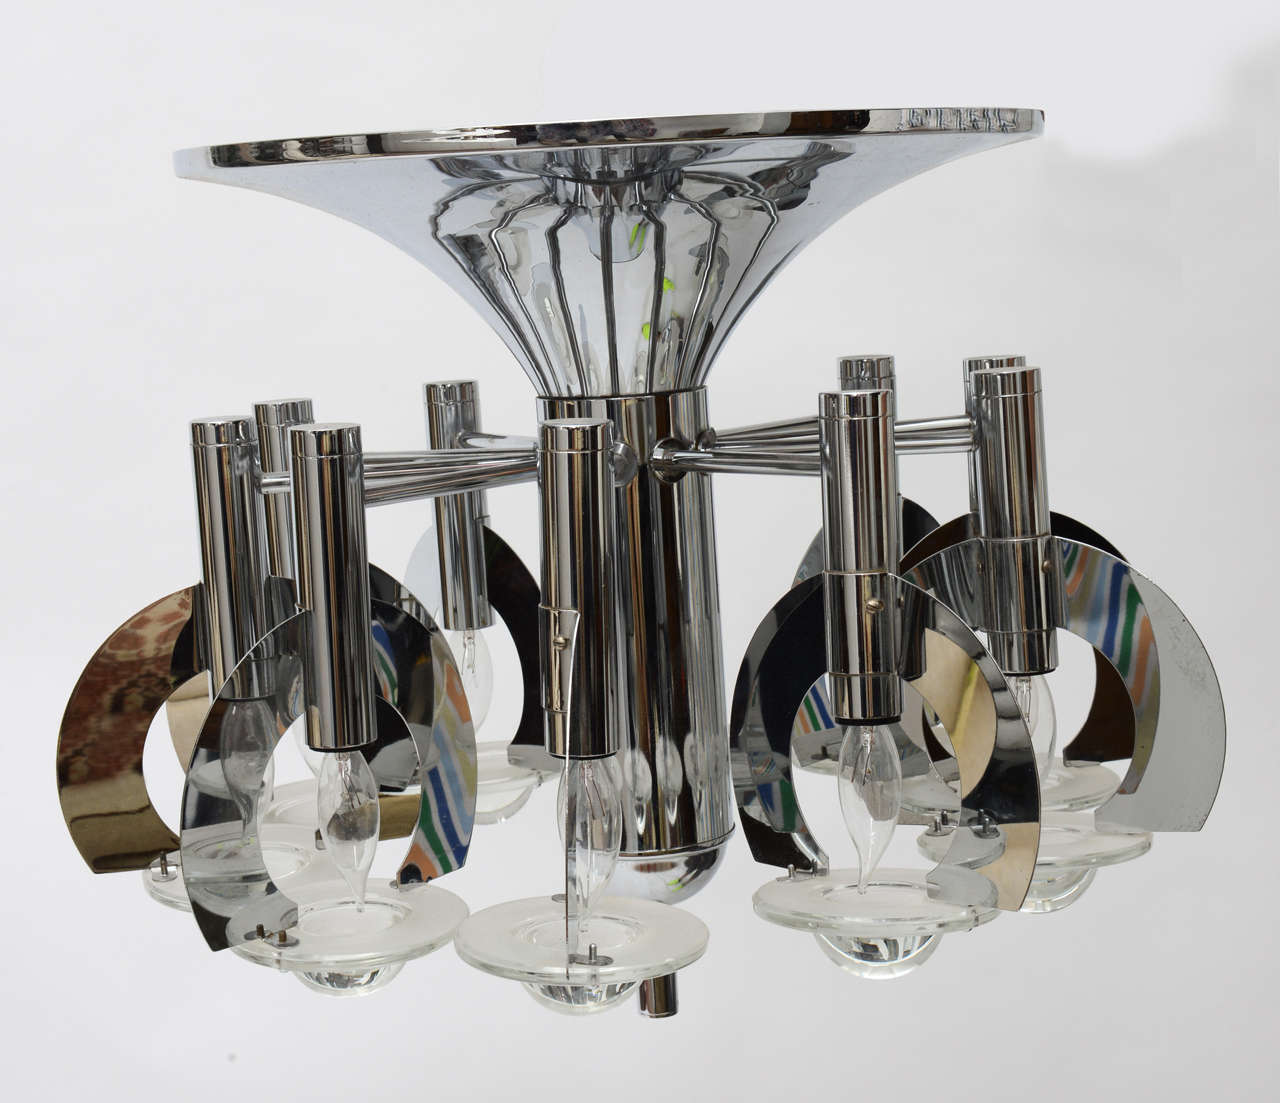 Beautiful Scolari chandelier with Italian Lense glass from 1969